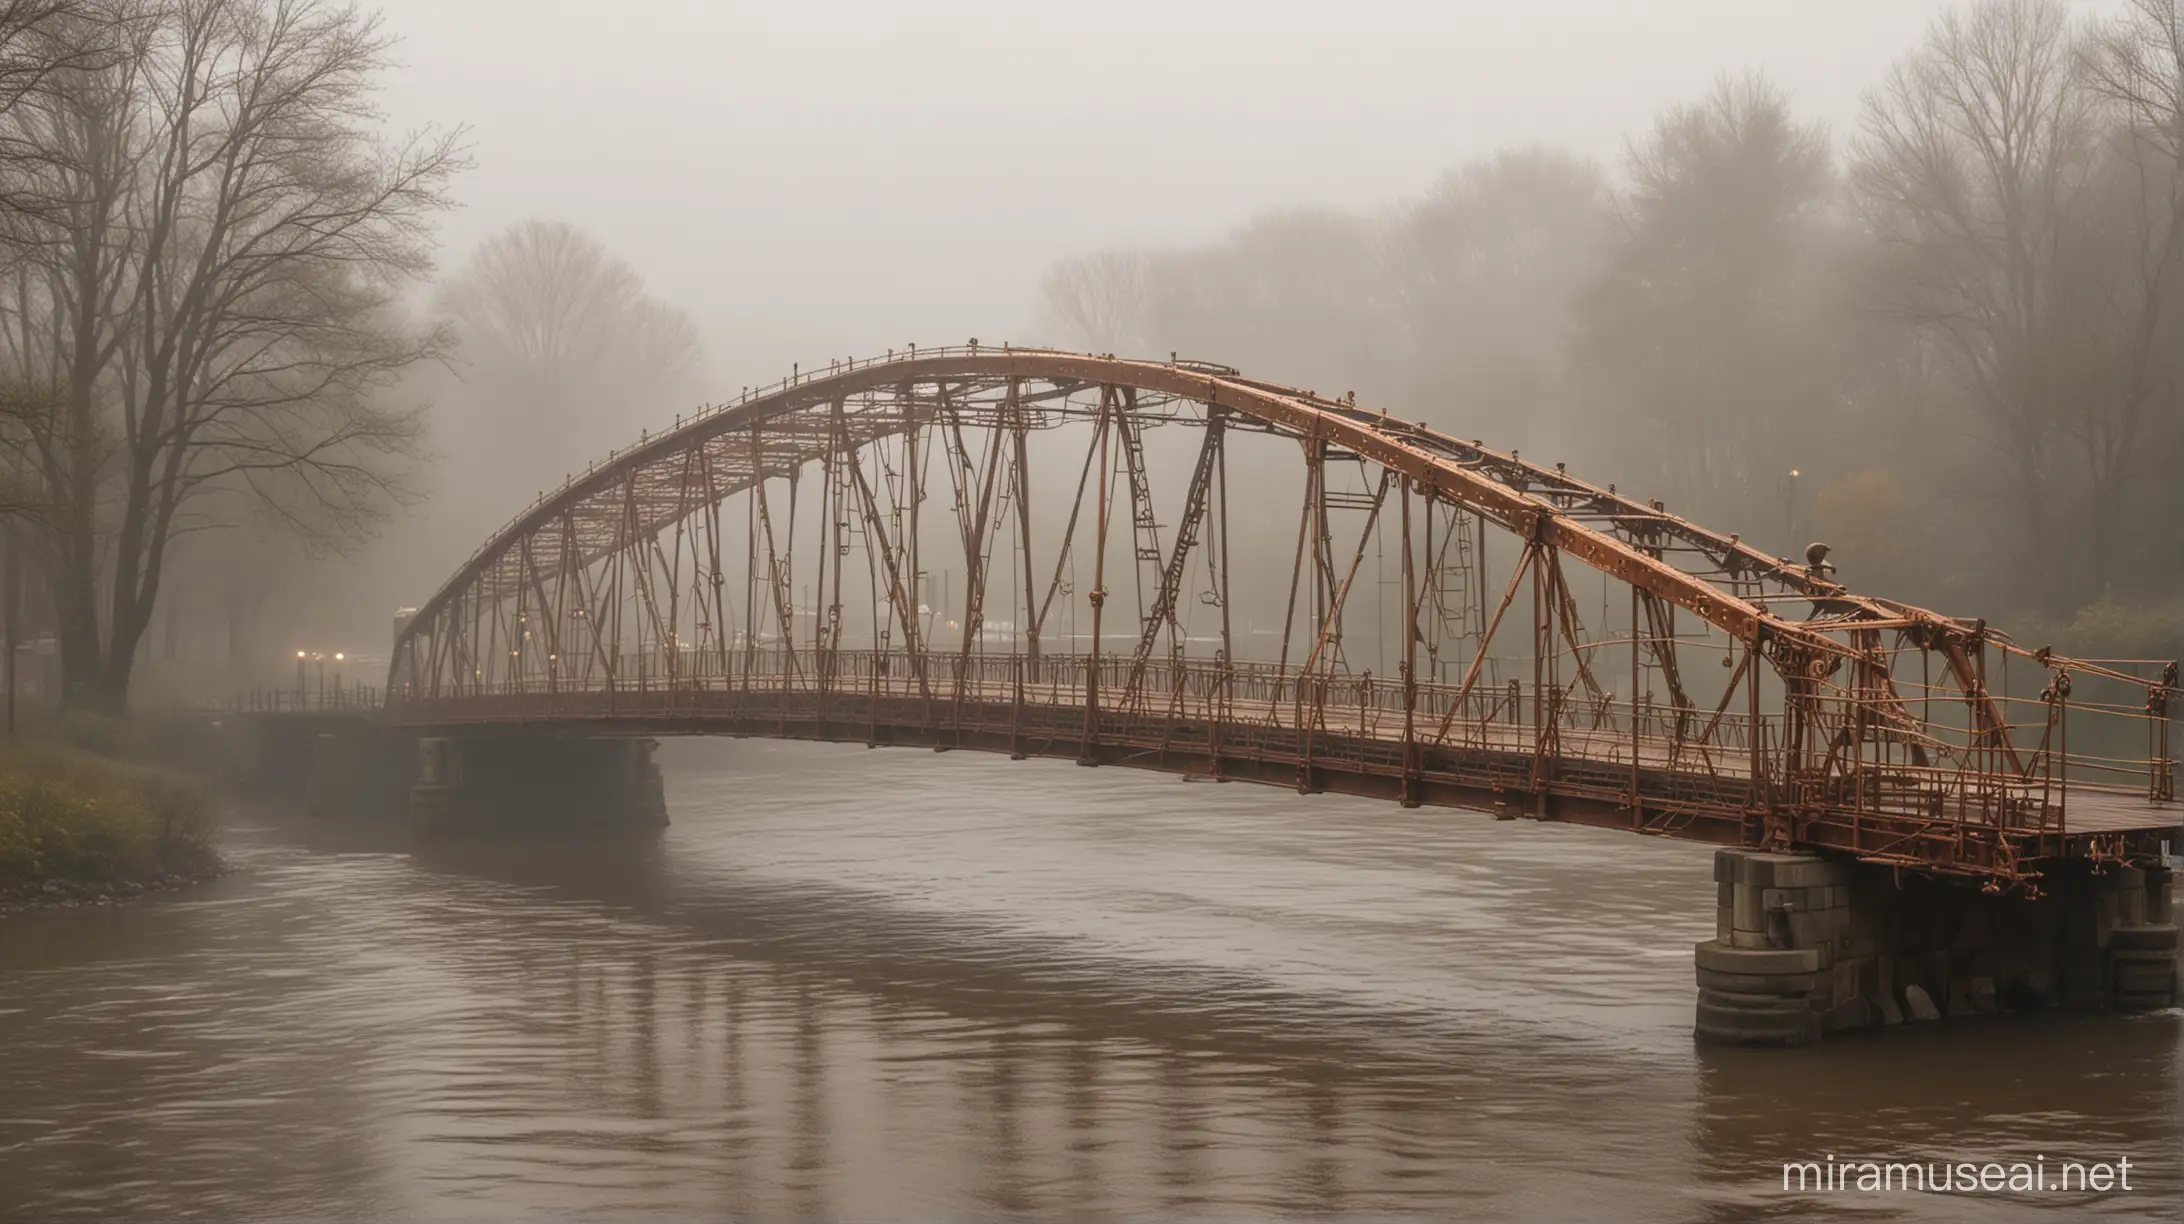 distant view of a steampunk bridge over troubled river. the bridge is made of copper and brass. fog and rain.